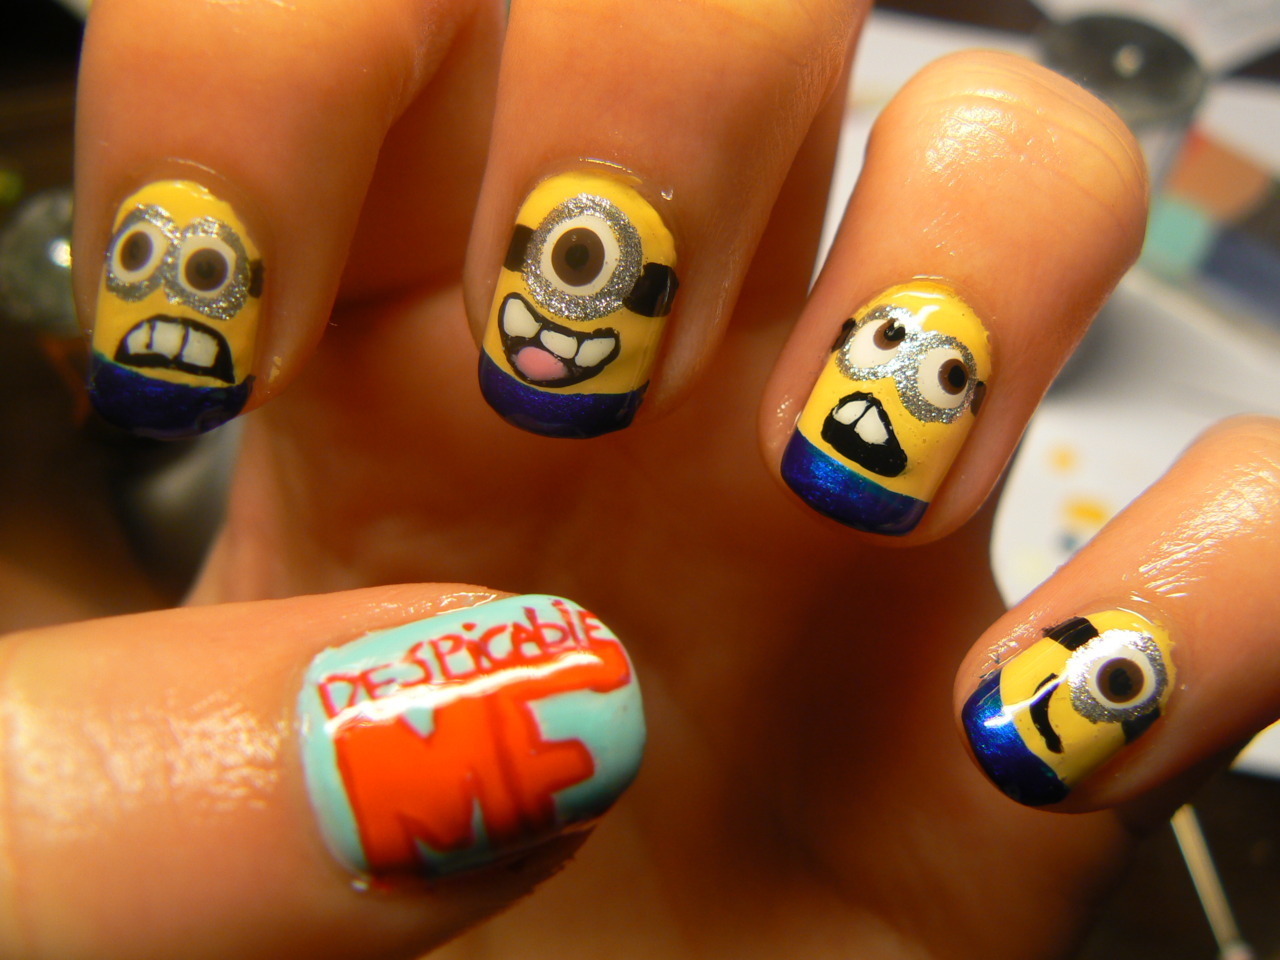 Nailart inspired by the movie Despicable me.